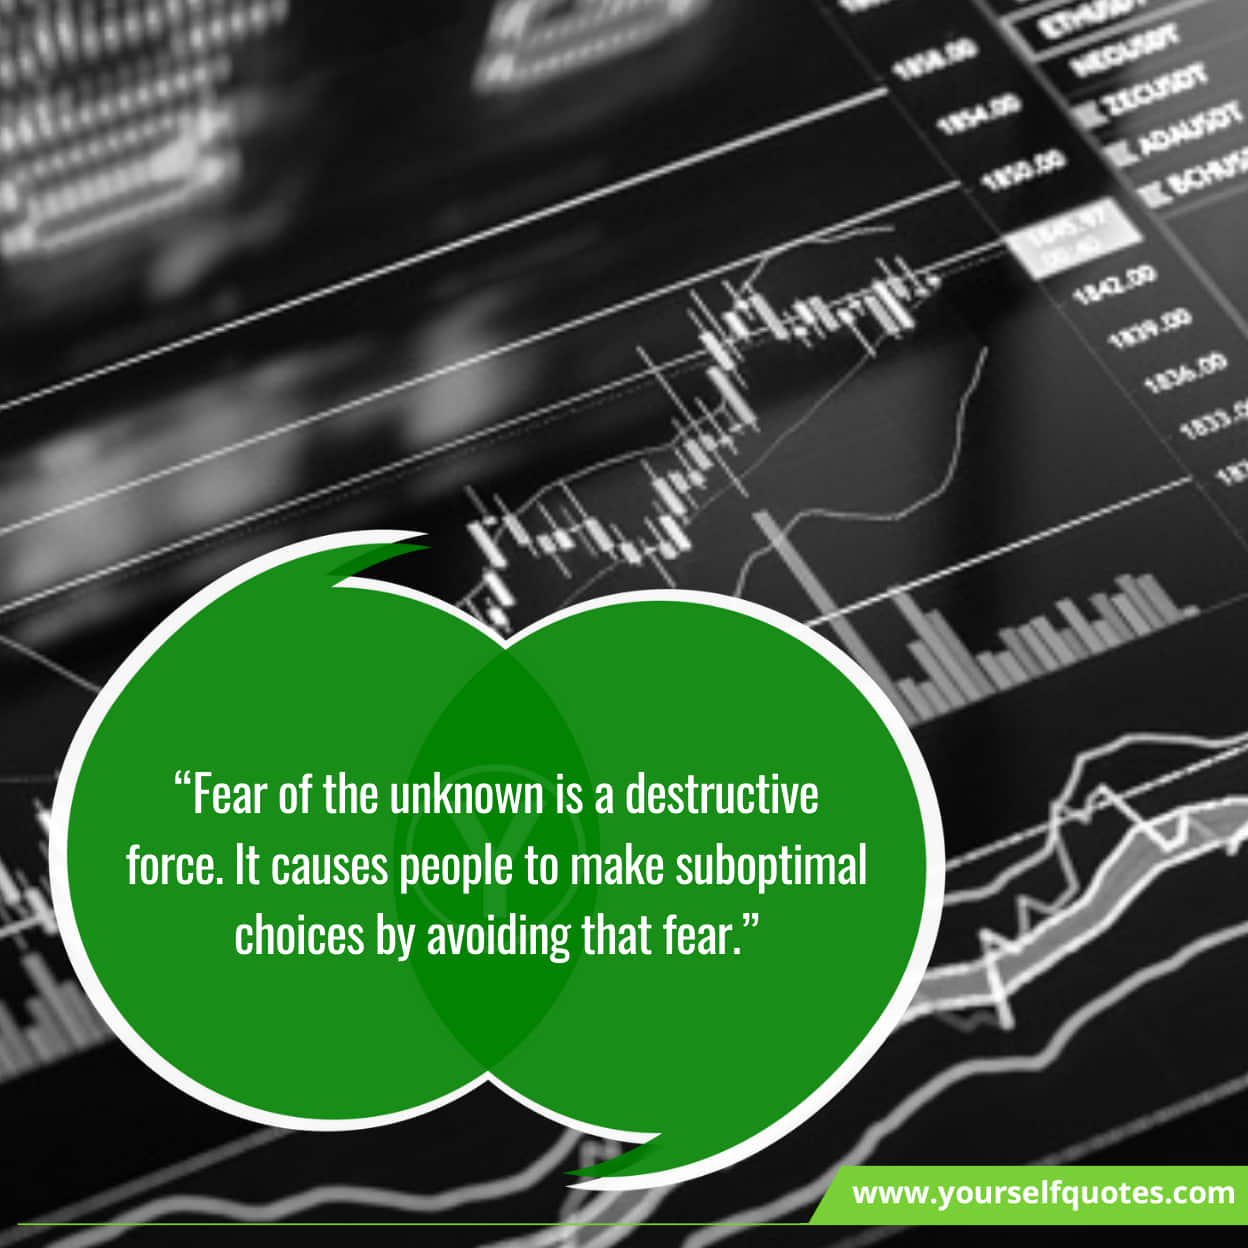 Stock Market Quotes About Wealth Creation